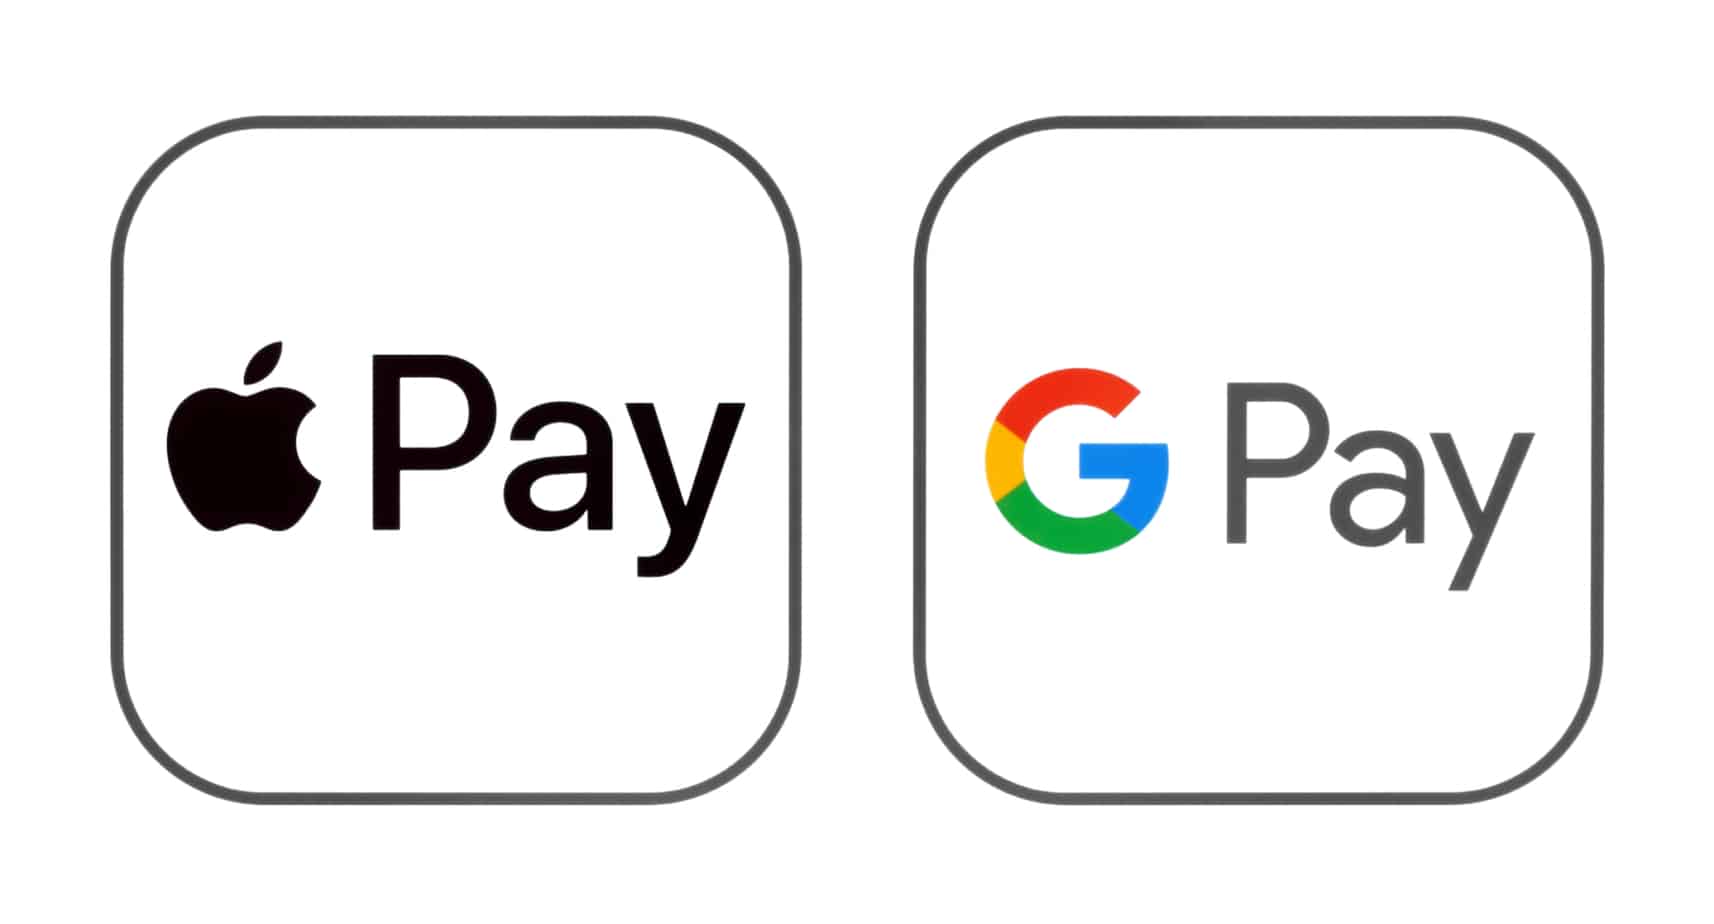 find-stores-that-accept-apple-pay-and-google-pay-5-tips